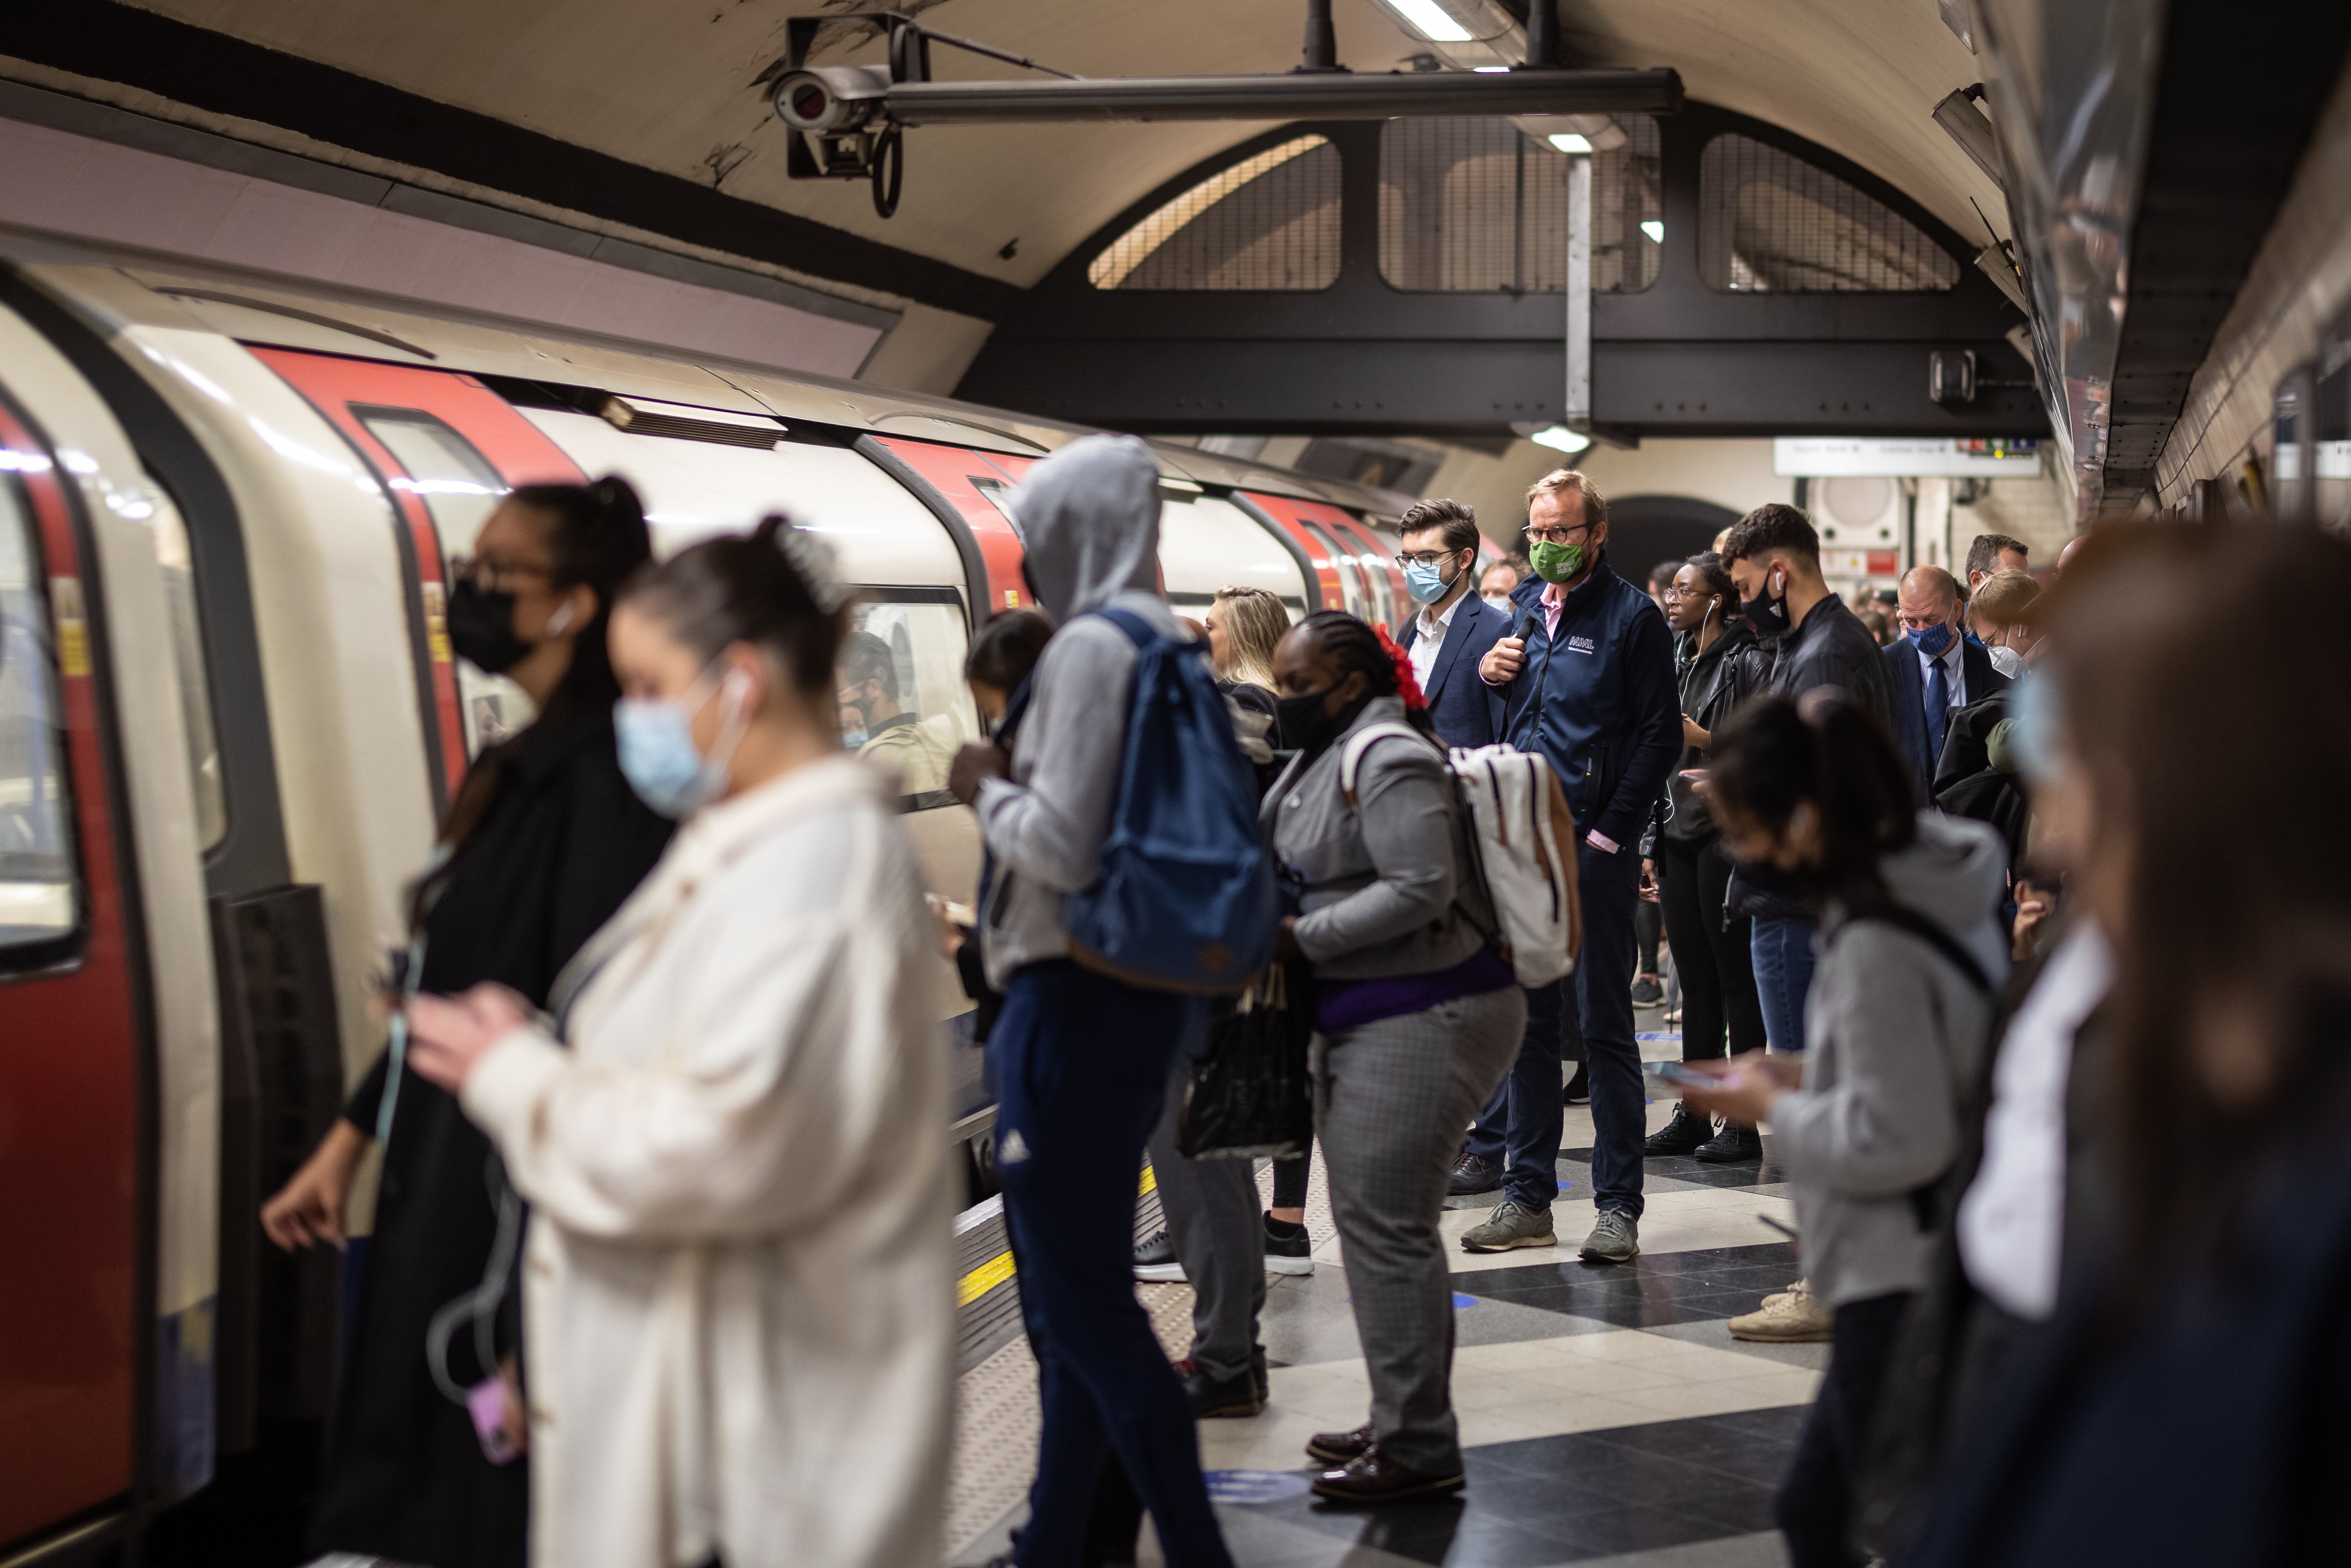 Commuters will still be required to weak a mask on the tube after July 19